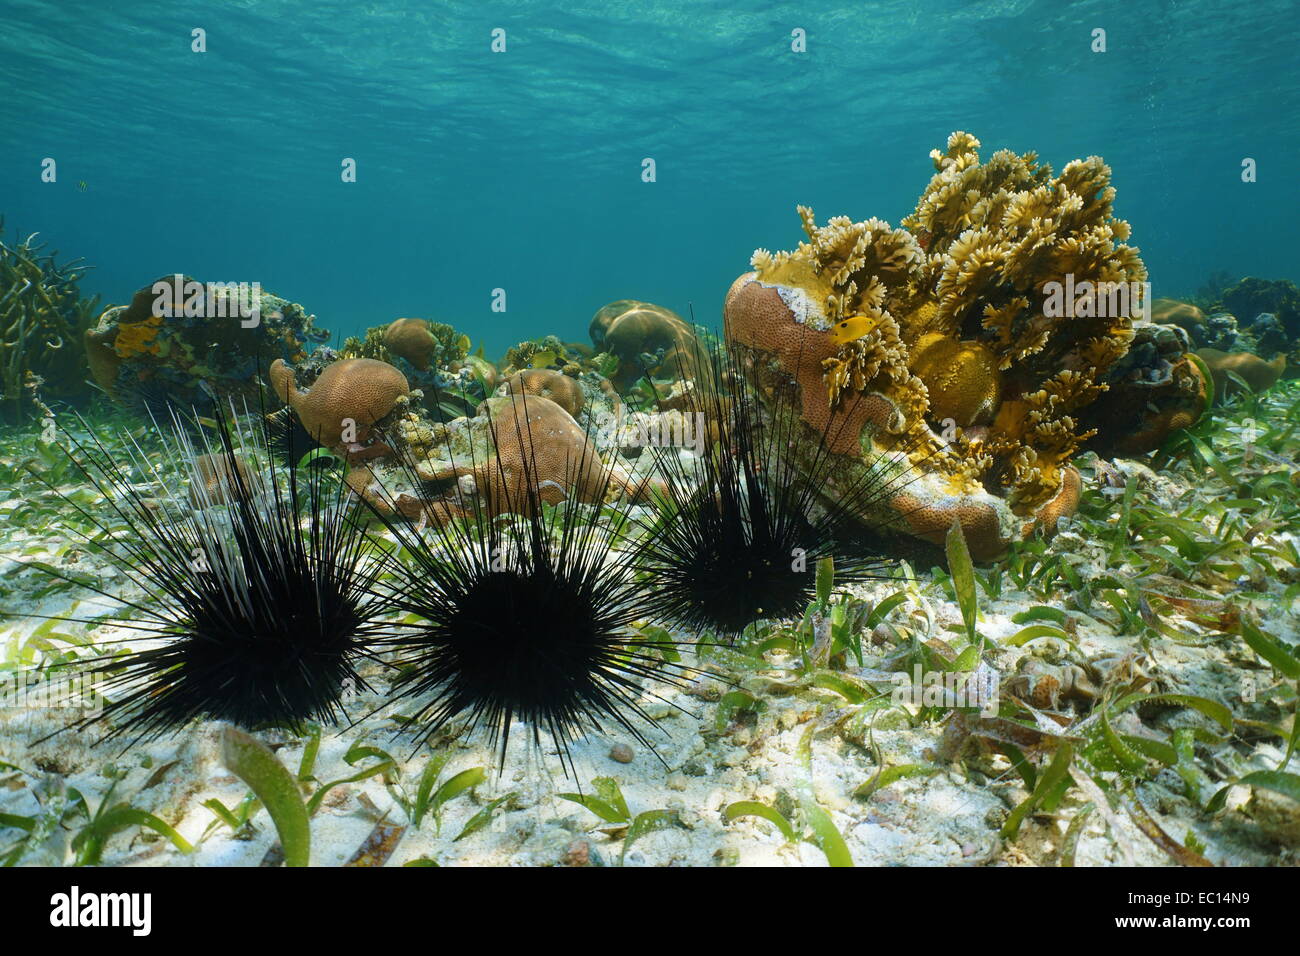 Long spined sea urchins underwater on seabed of the Caribbean sea Stock Photo